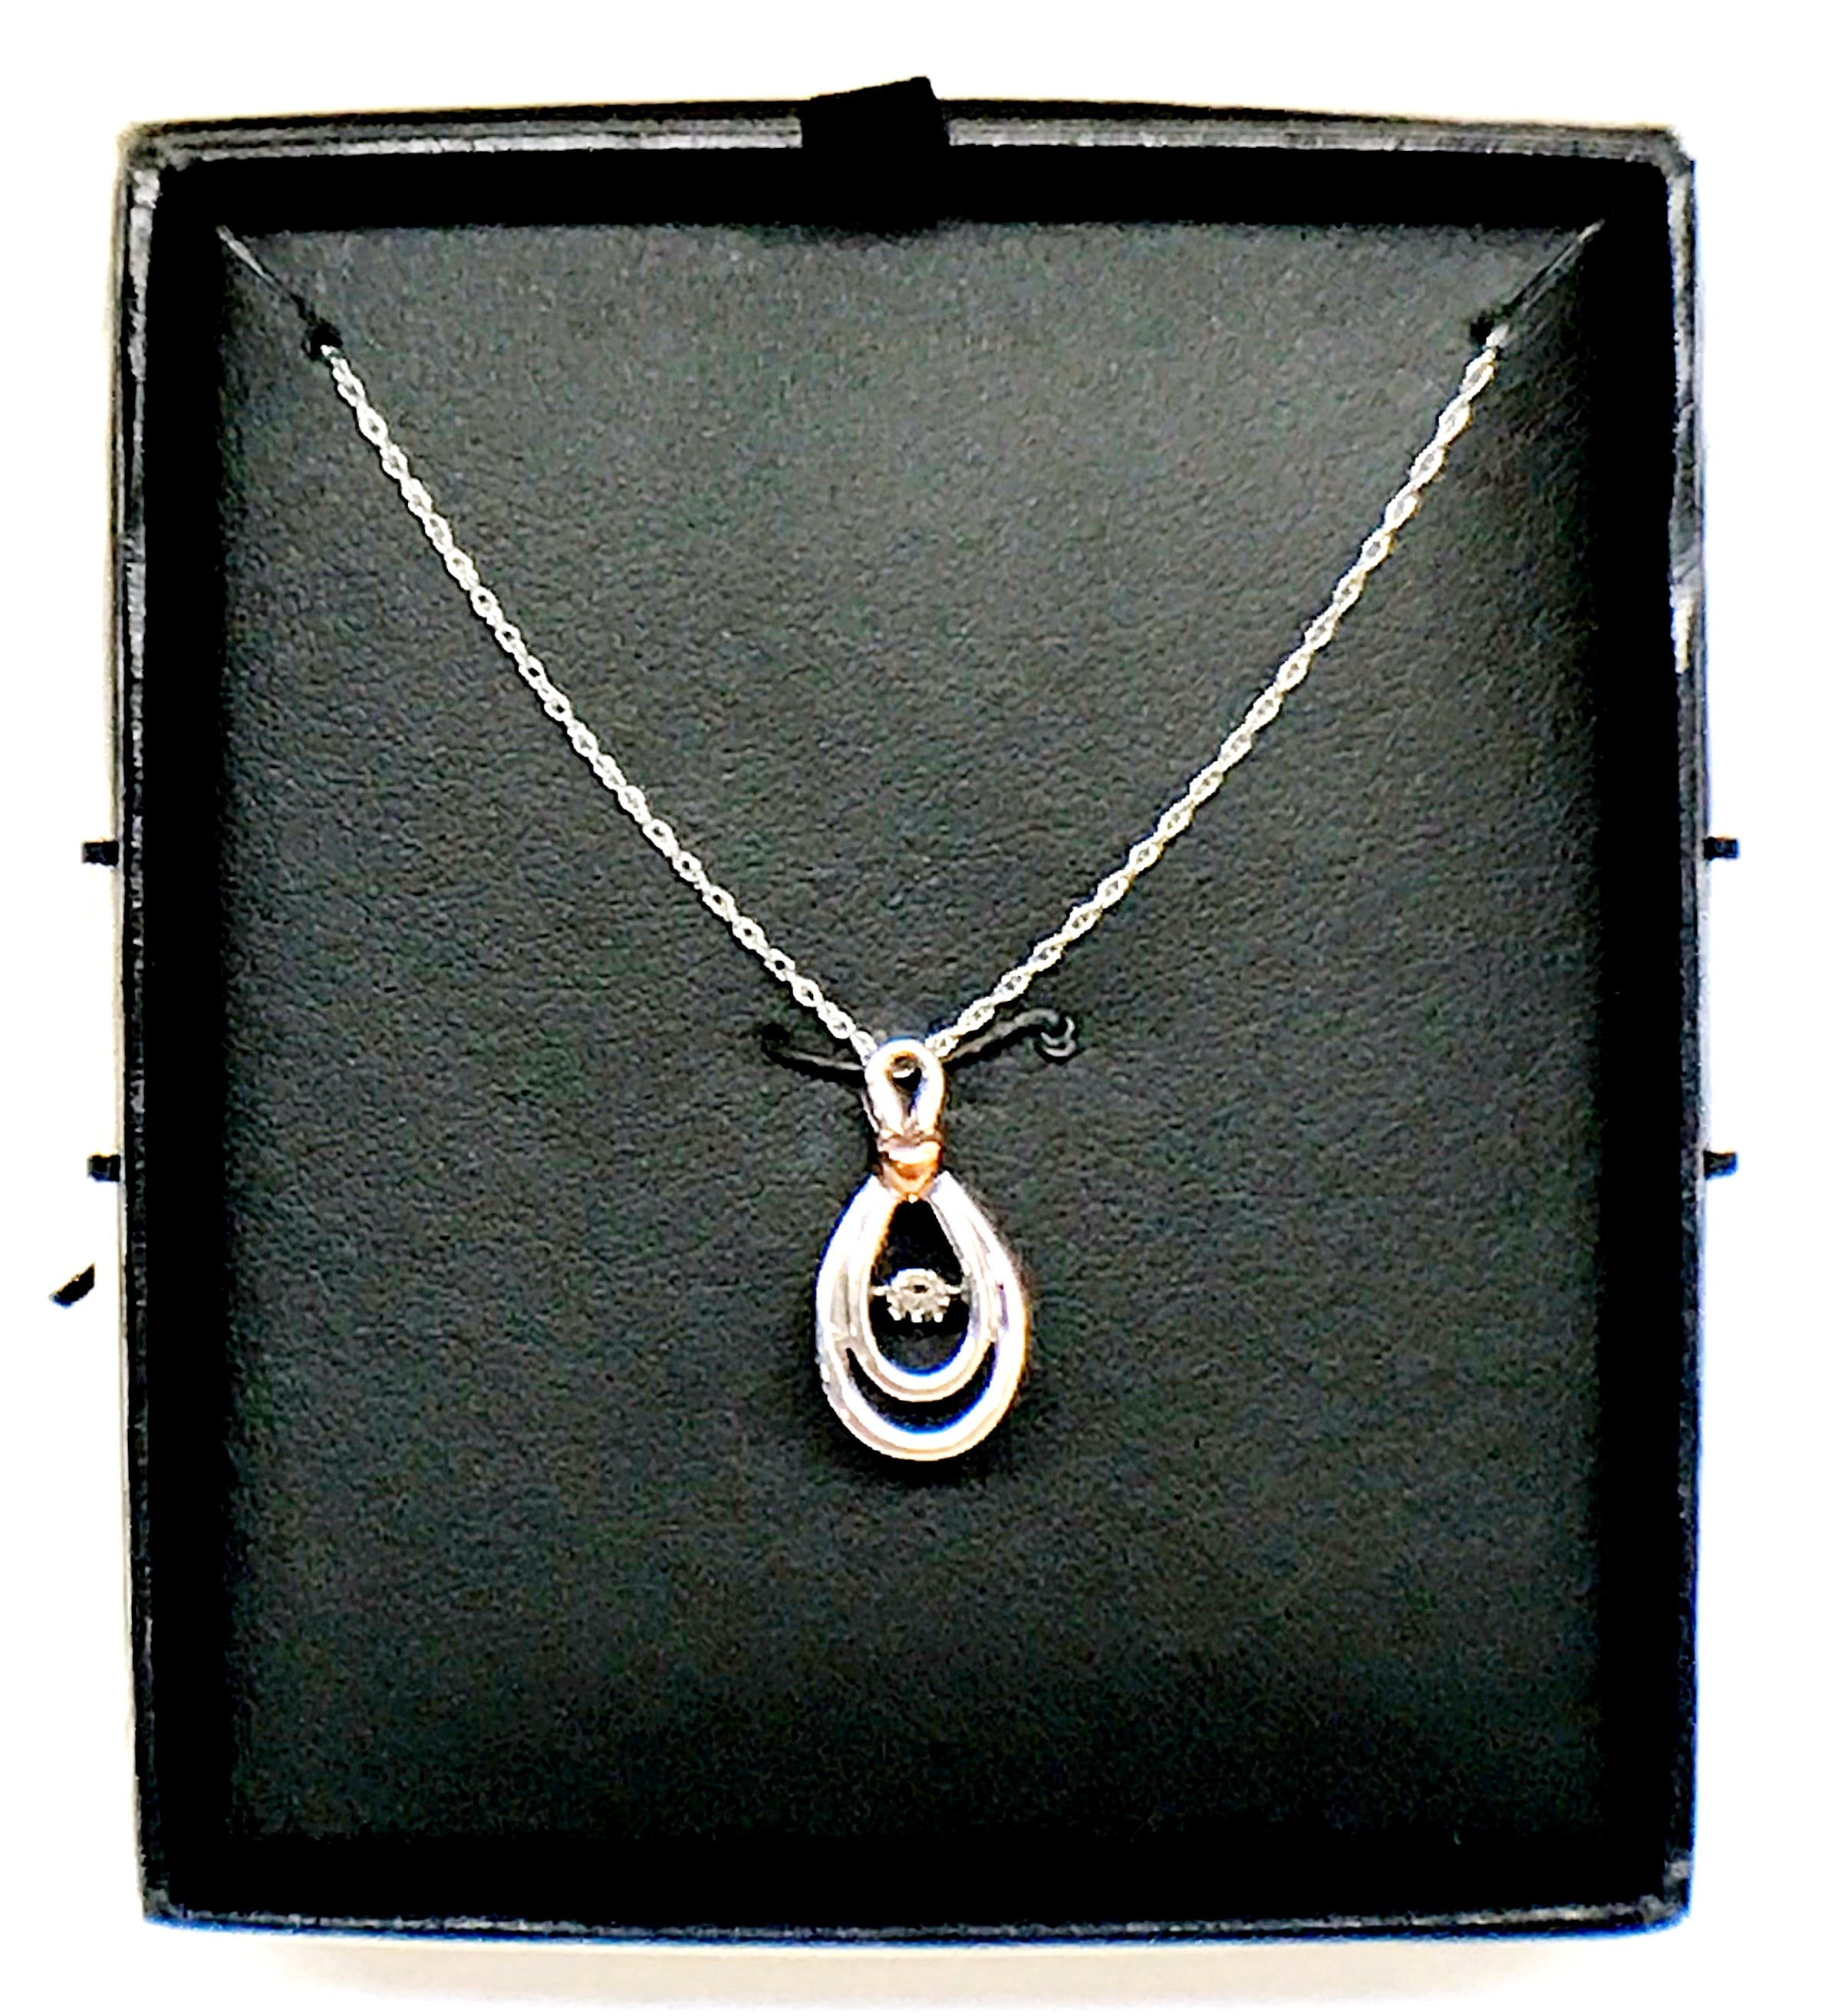 Loveboat Diamond Heart Pendant Necklace in Sterling and 10K Rose Gold - Hers and His Treasures